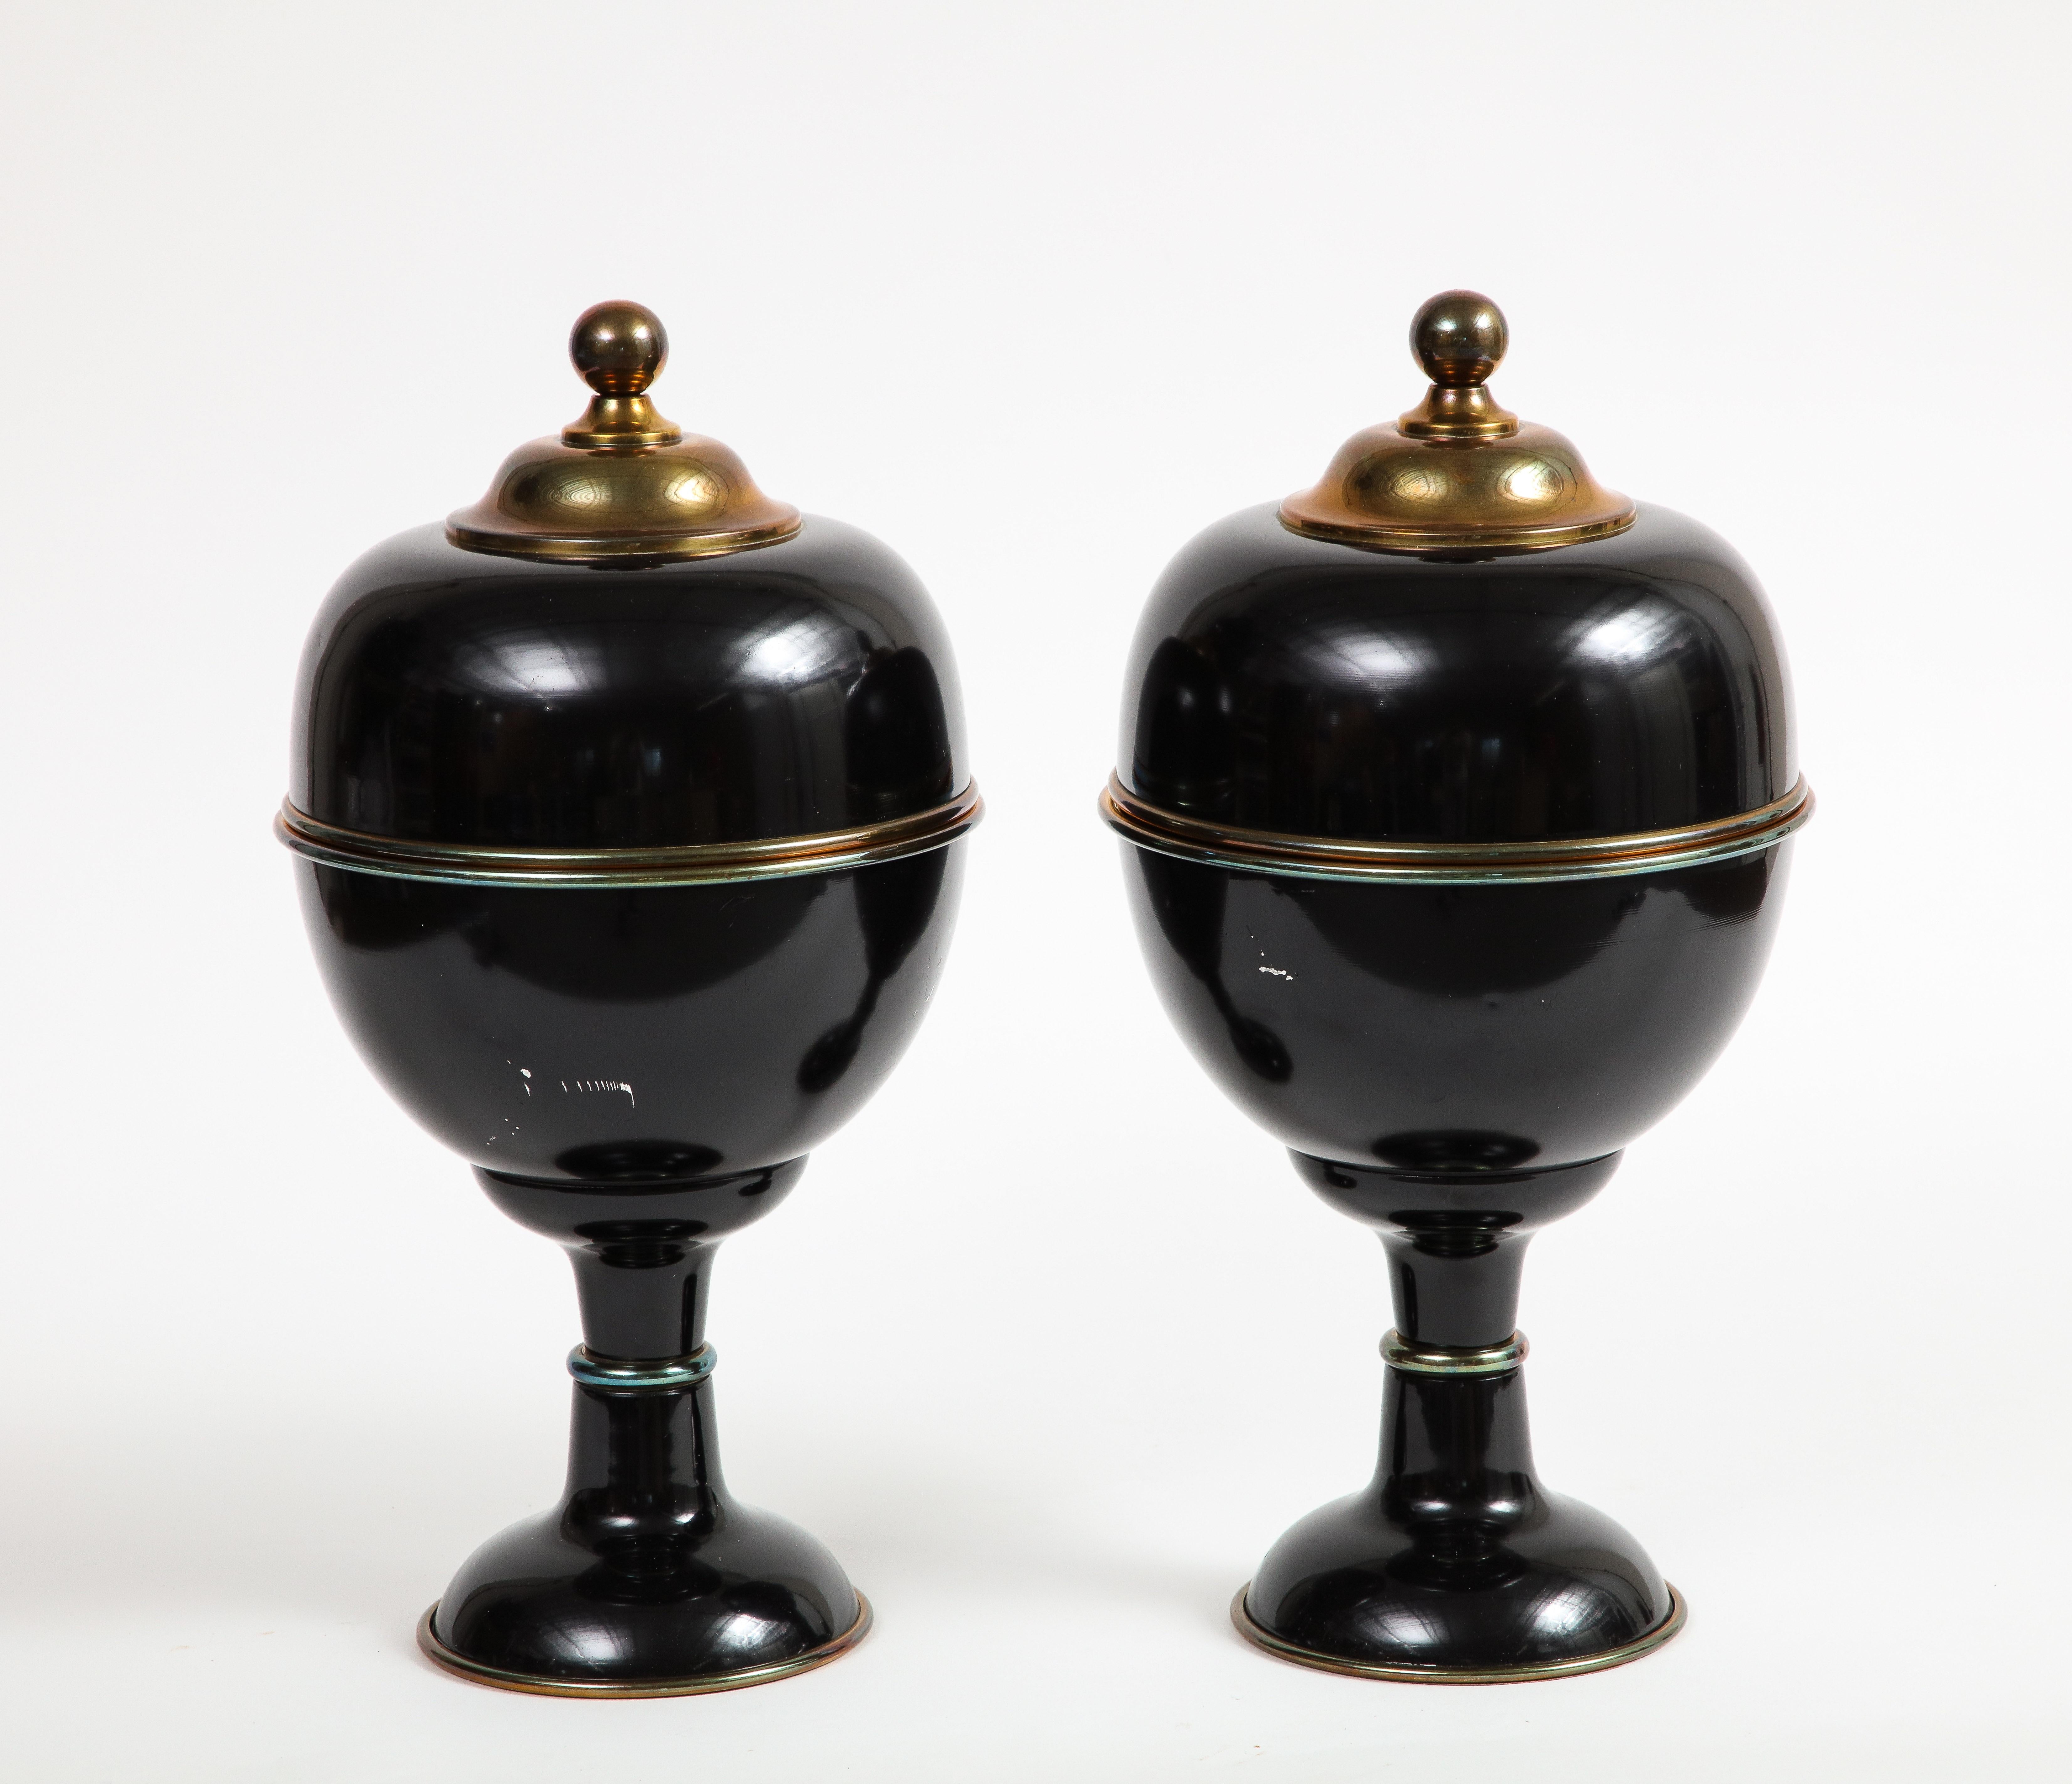 Pair of Large Decorative Black Enamel Urns with Brass Detail For Sale 3